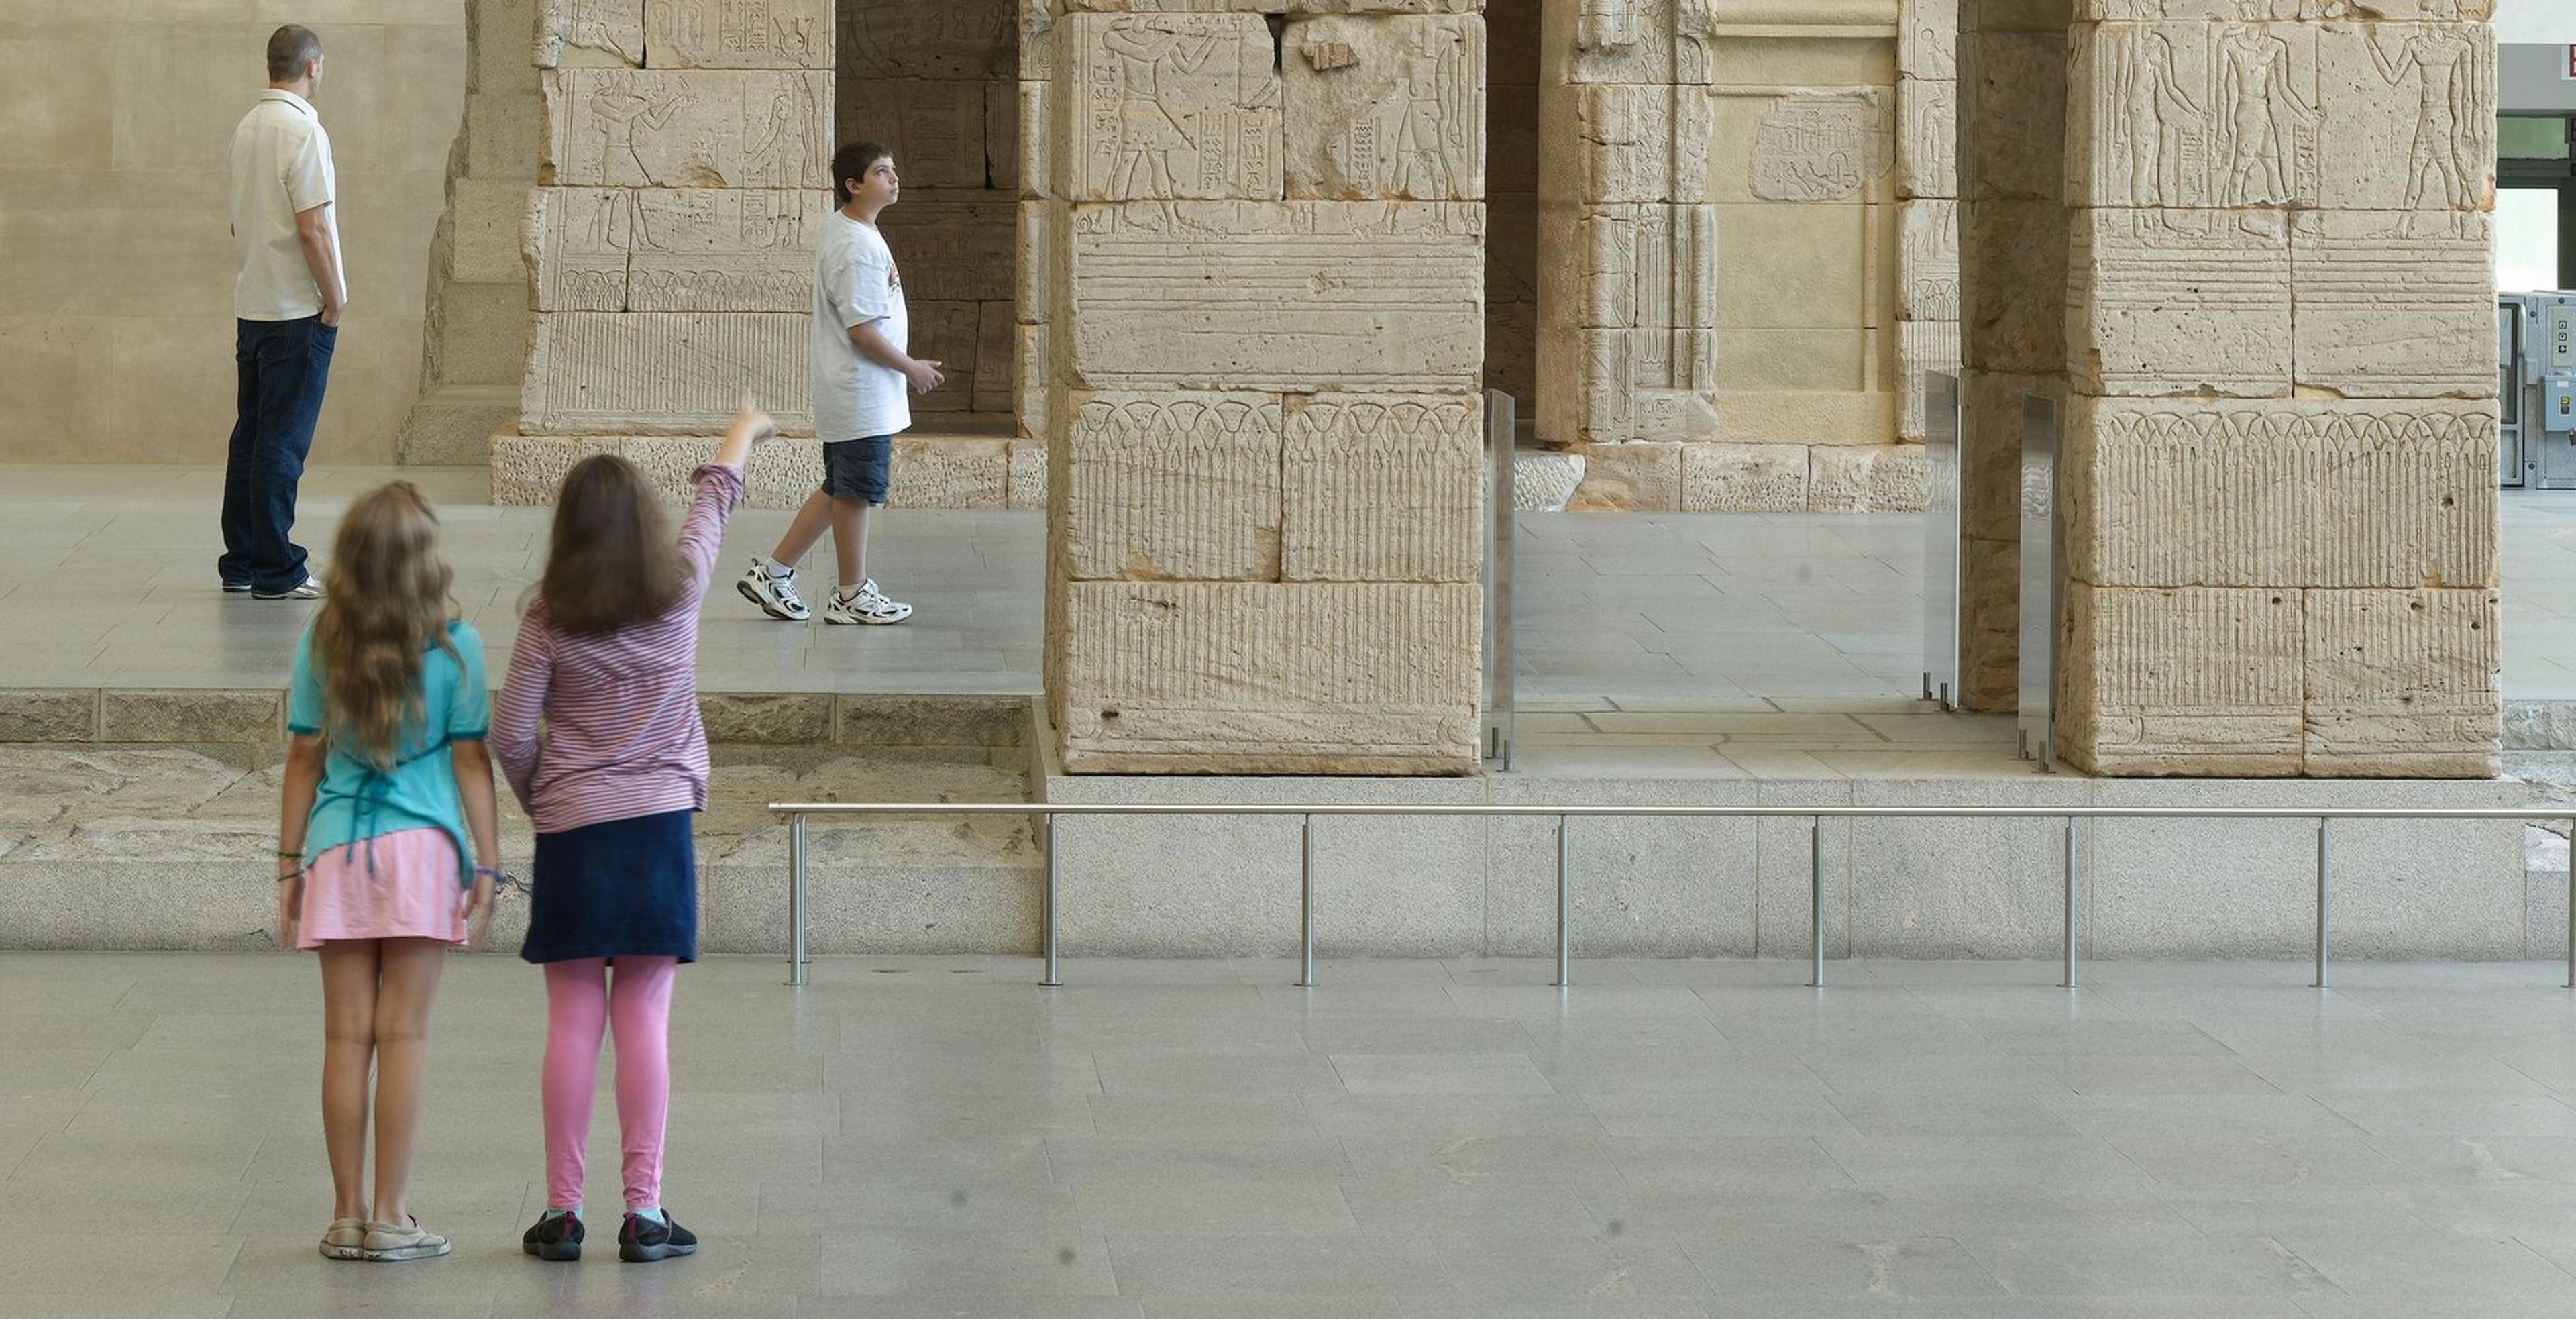 Two young children stand in front of the entrance of a stone Egyptian temple. The child on the right is pointing up to the structure.